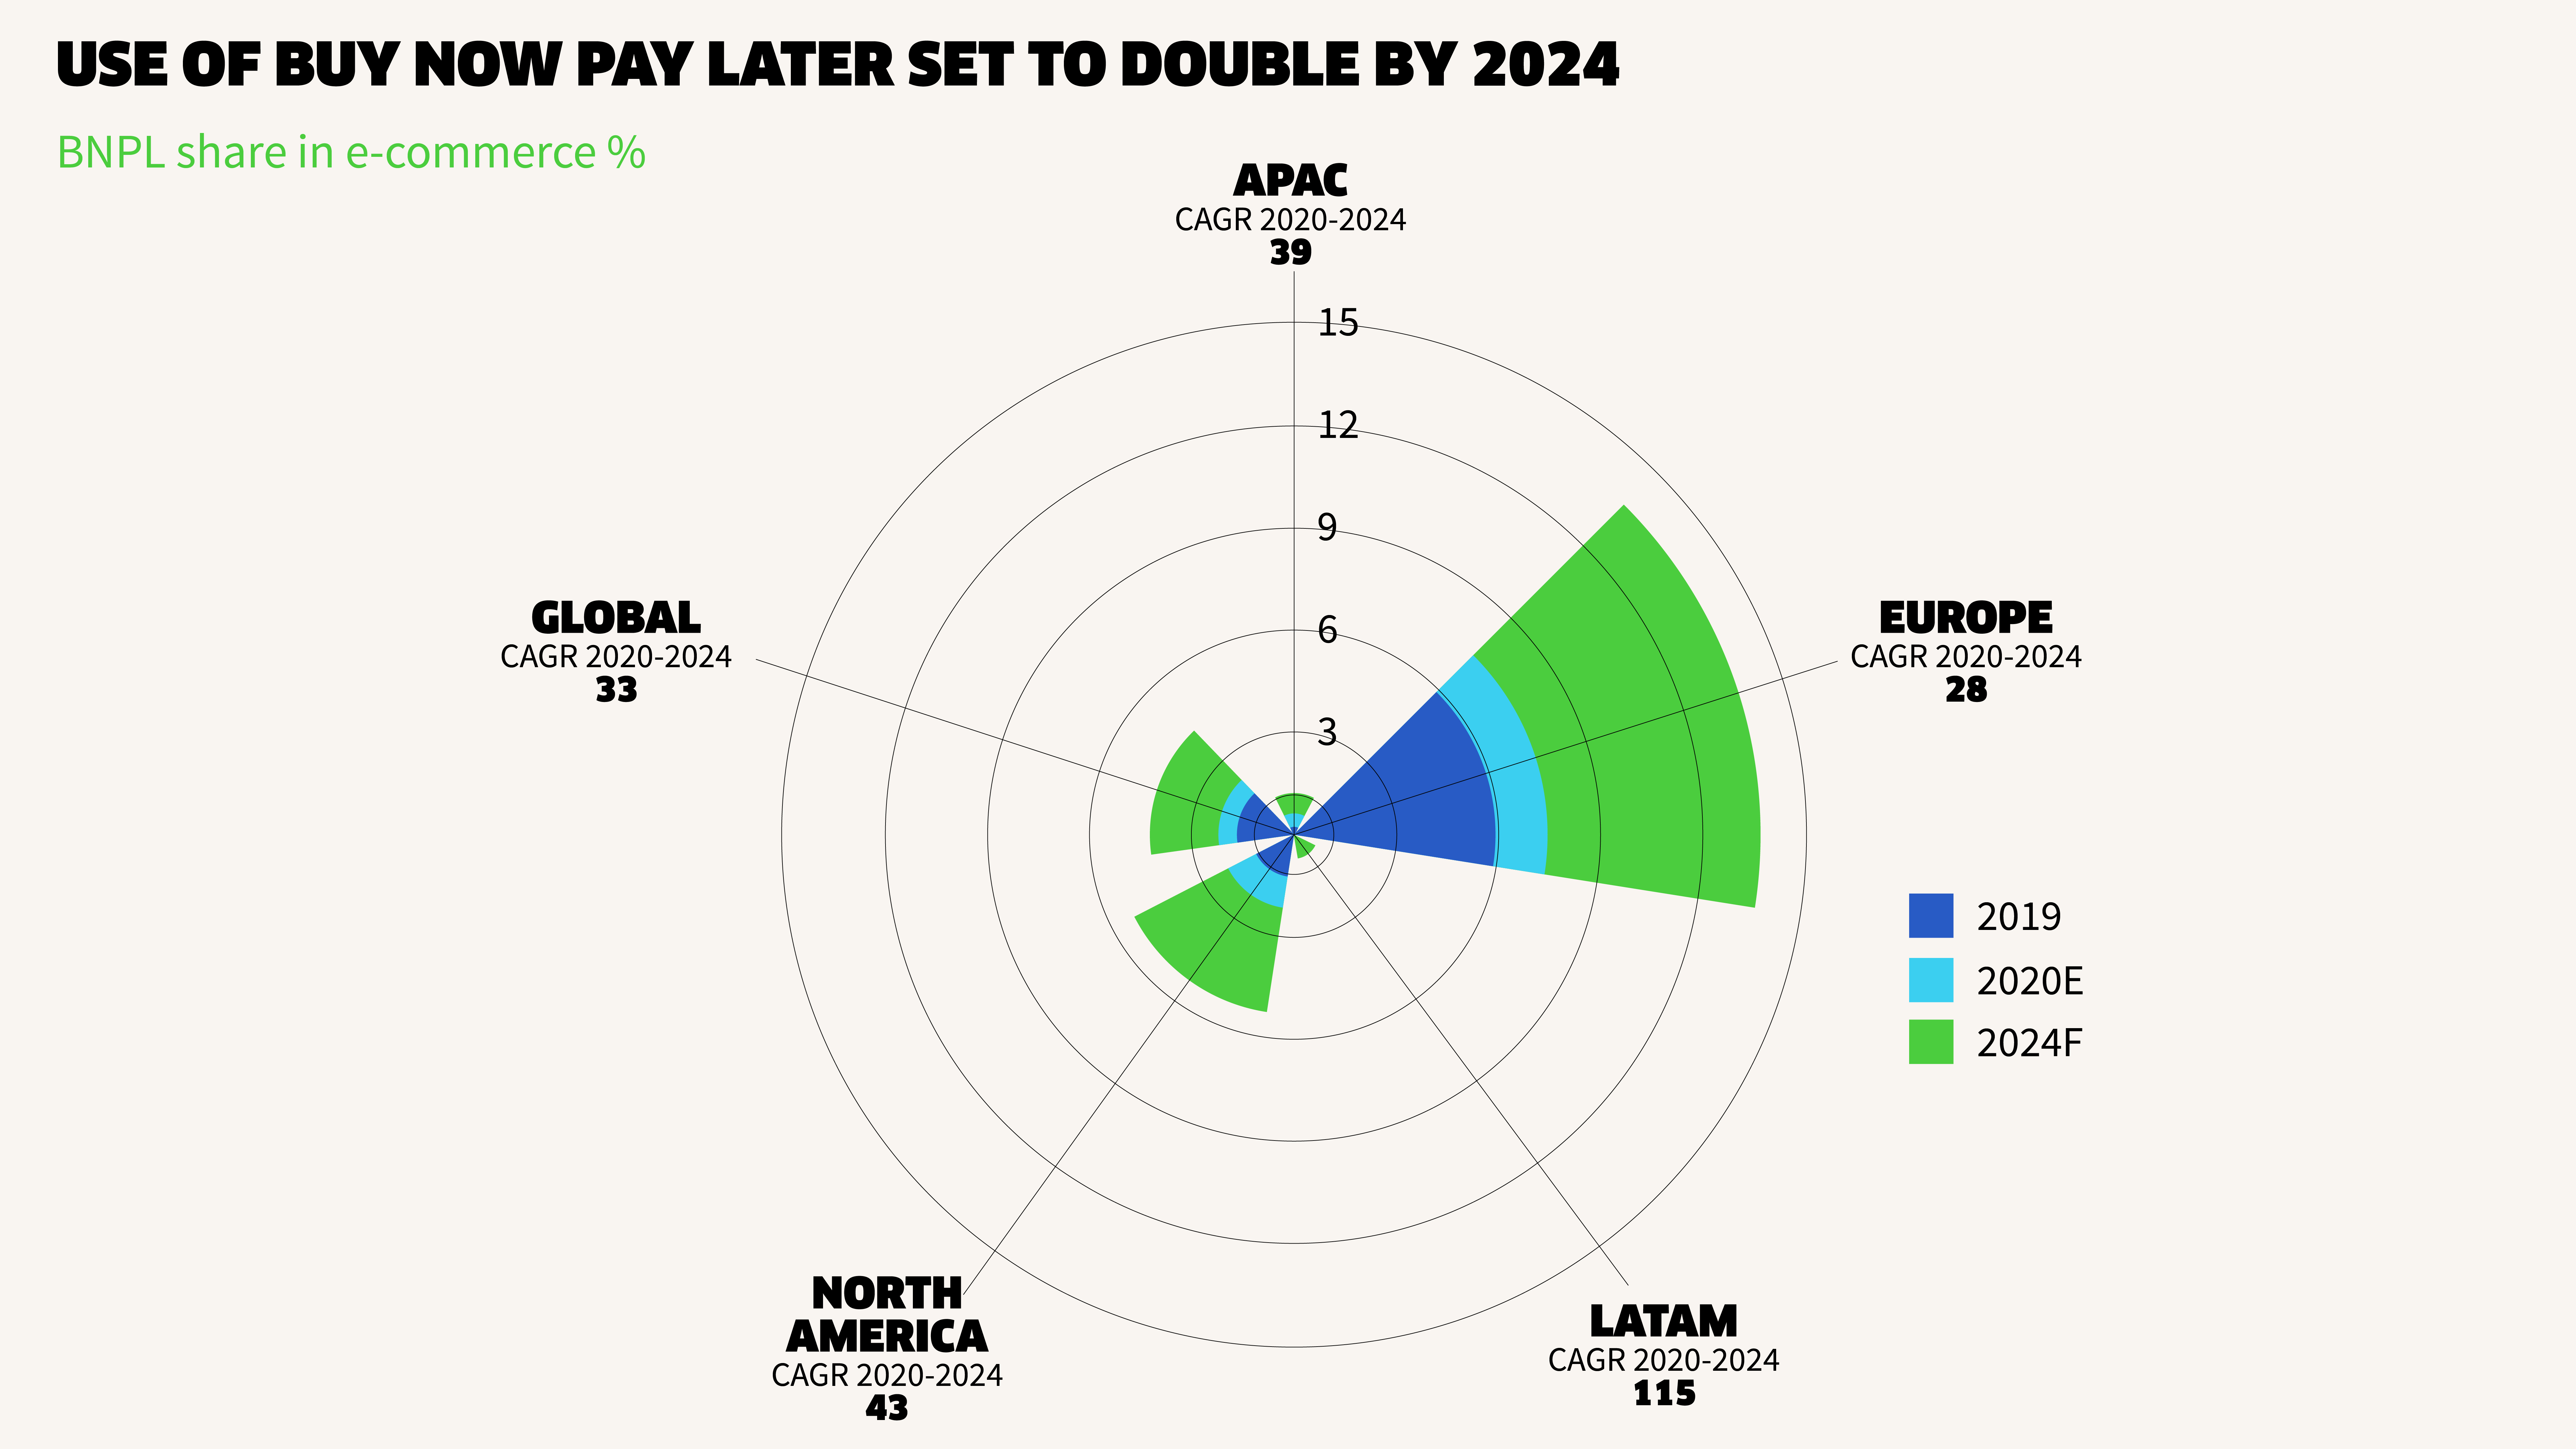 Use of buy now pay later set to double by 2024